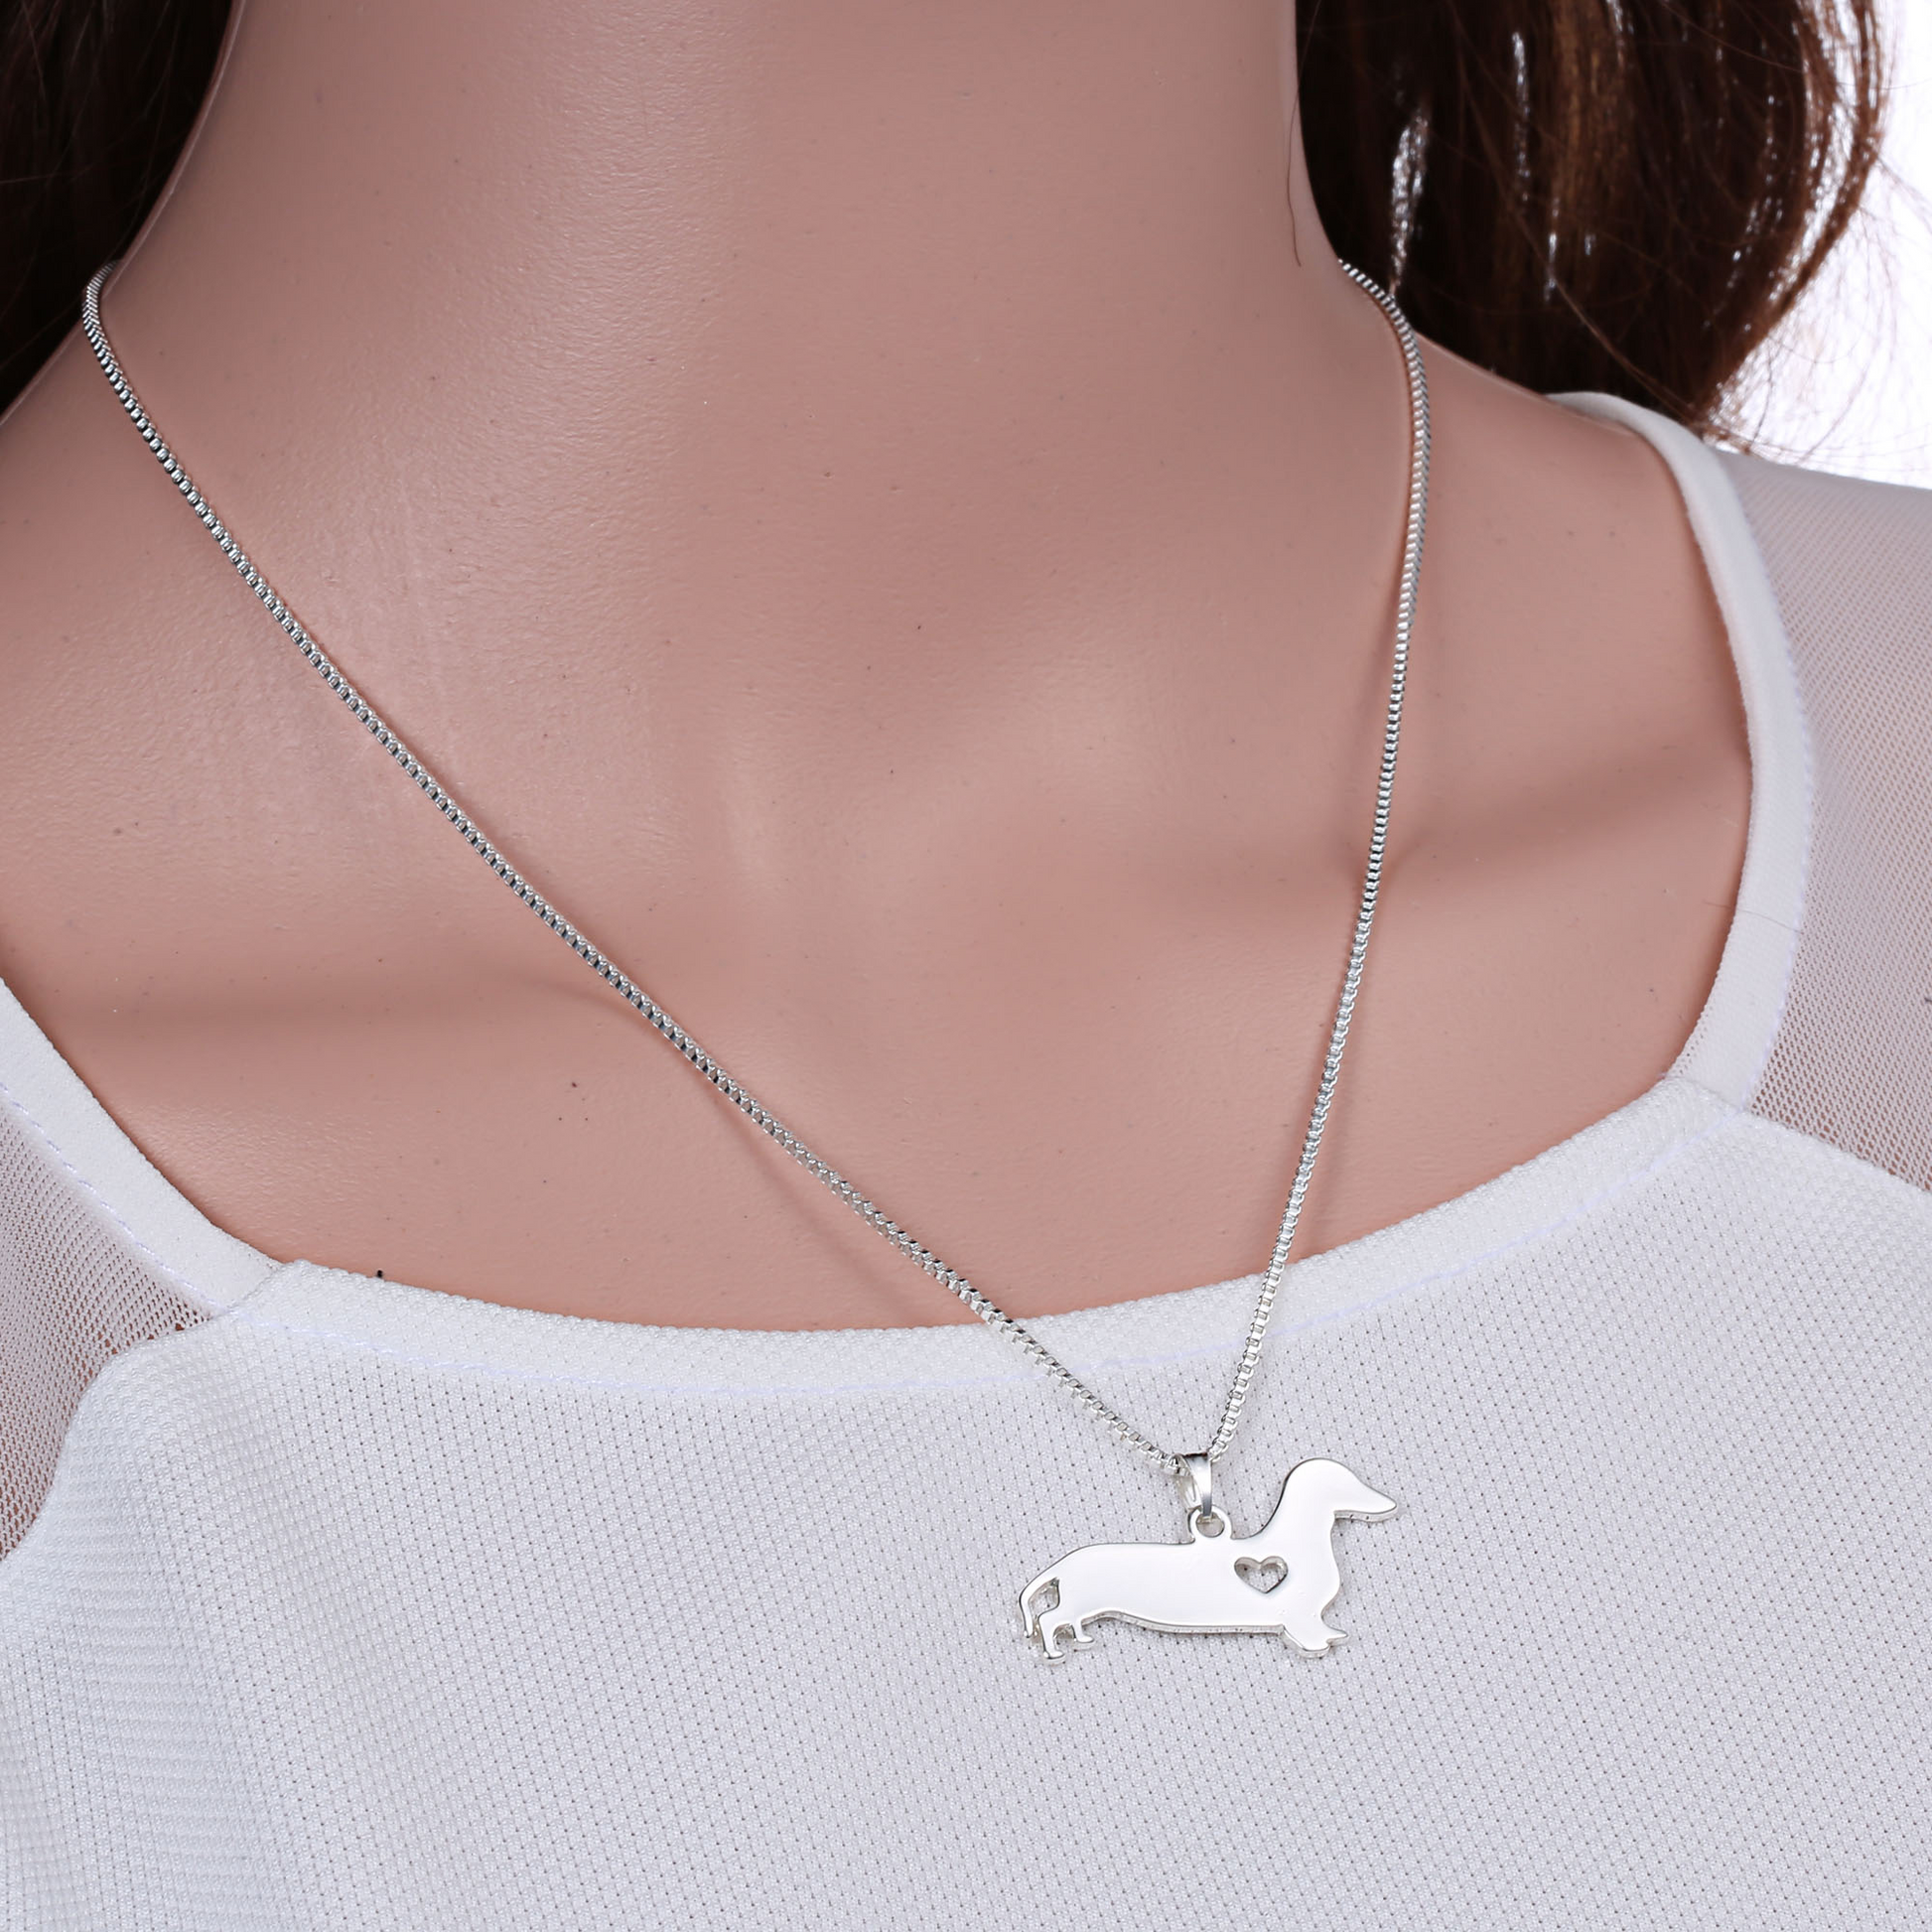 Zinc Alloy Dachshund With Heart Necklace | The Best Dachshund Gifts